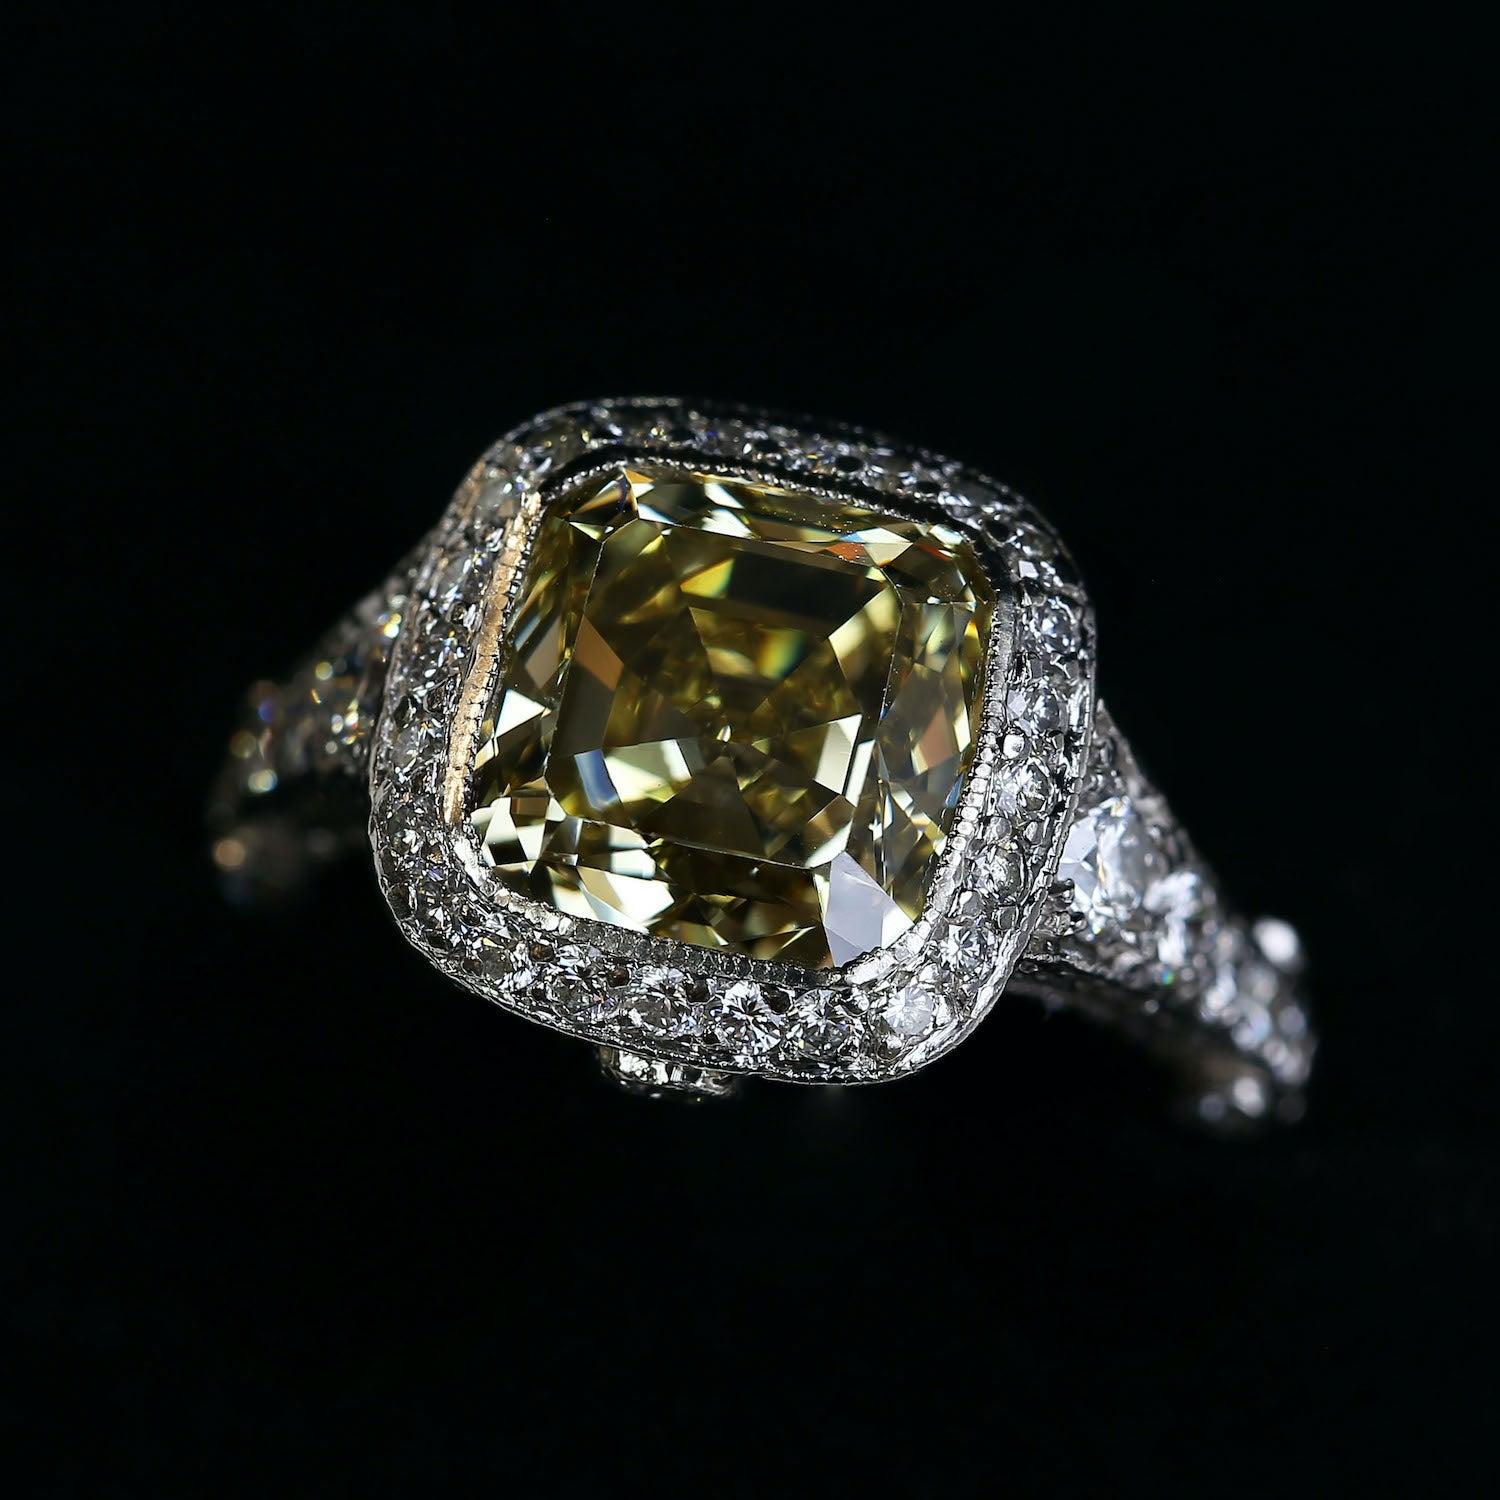 Tiffany & Co. Legacy 4.00 Carat Fancy Intense Yellow Diamond Engagement Ring For Sale 4